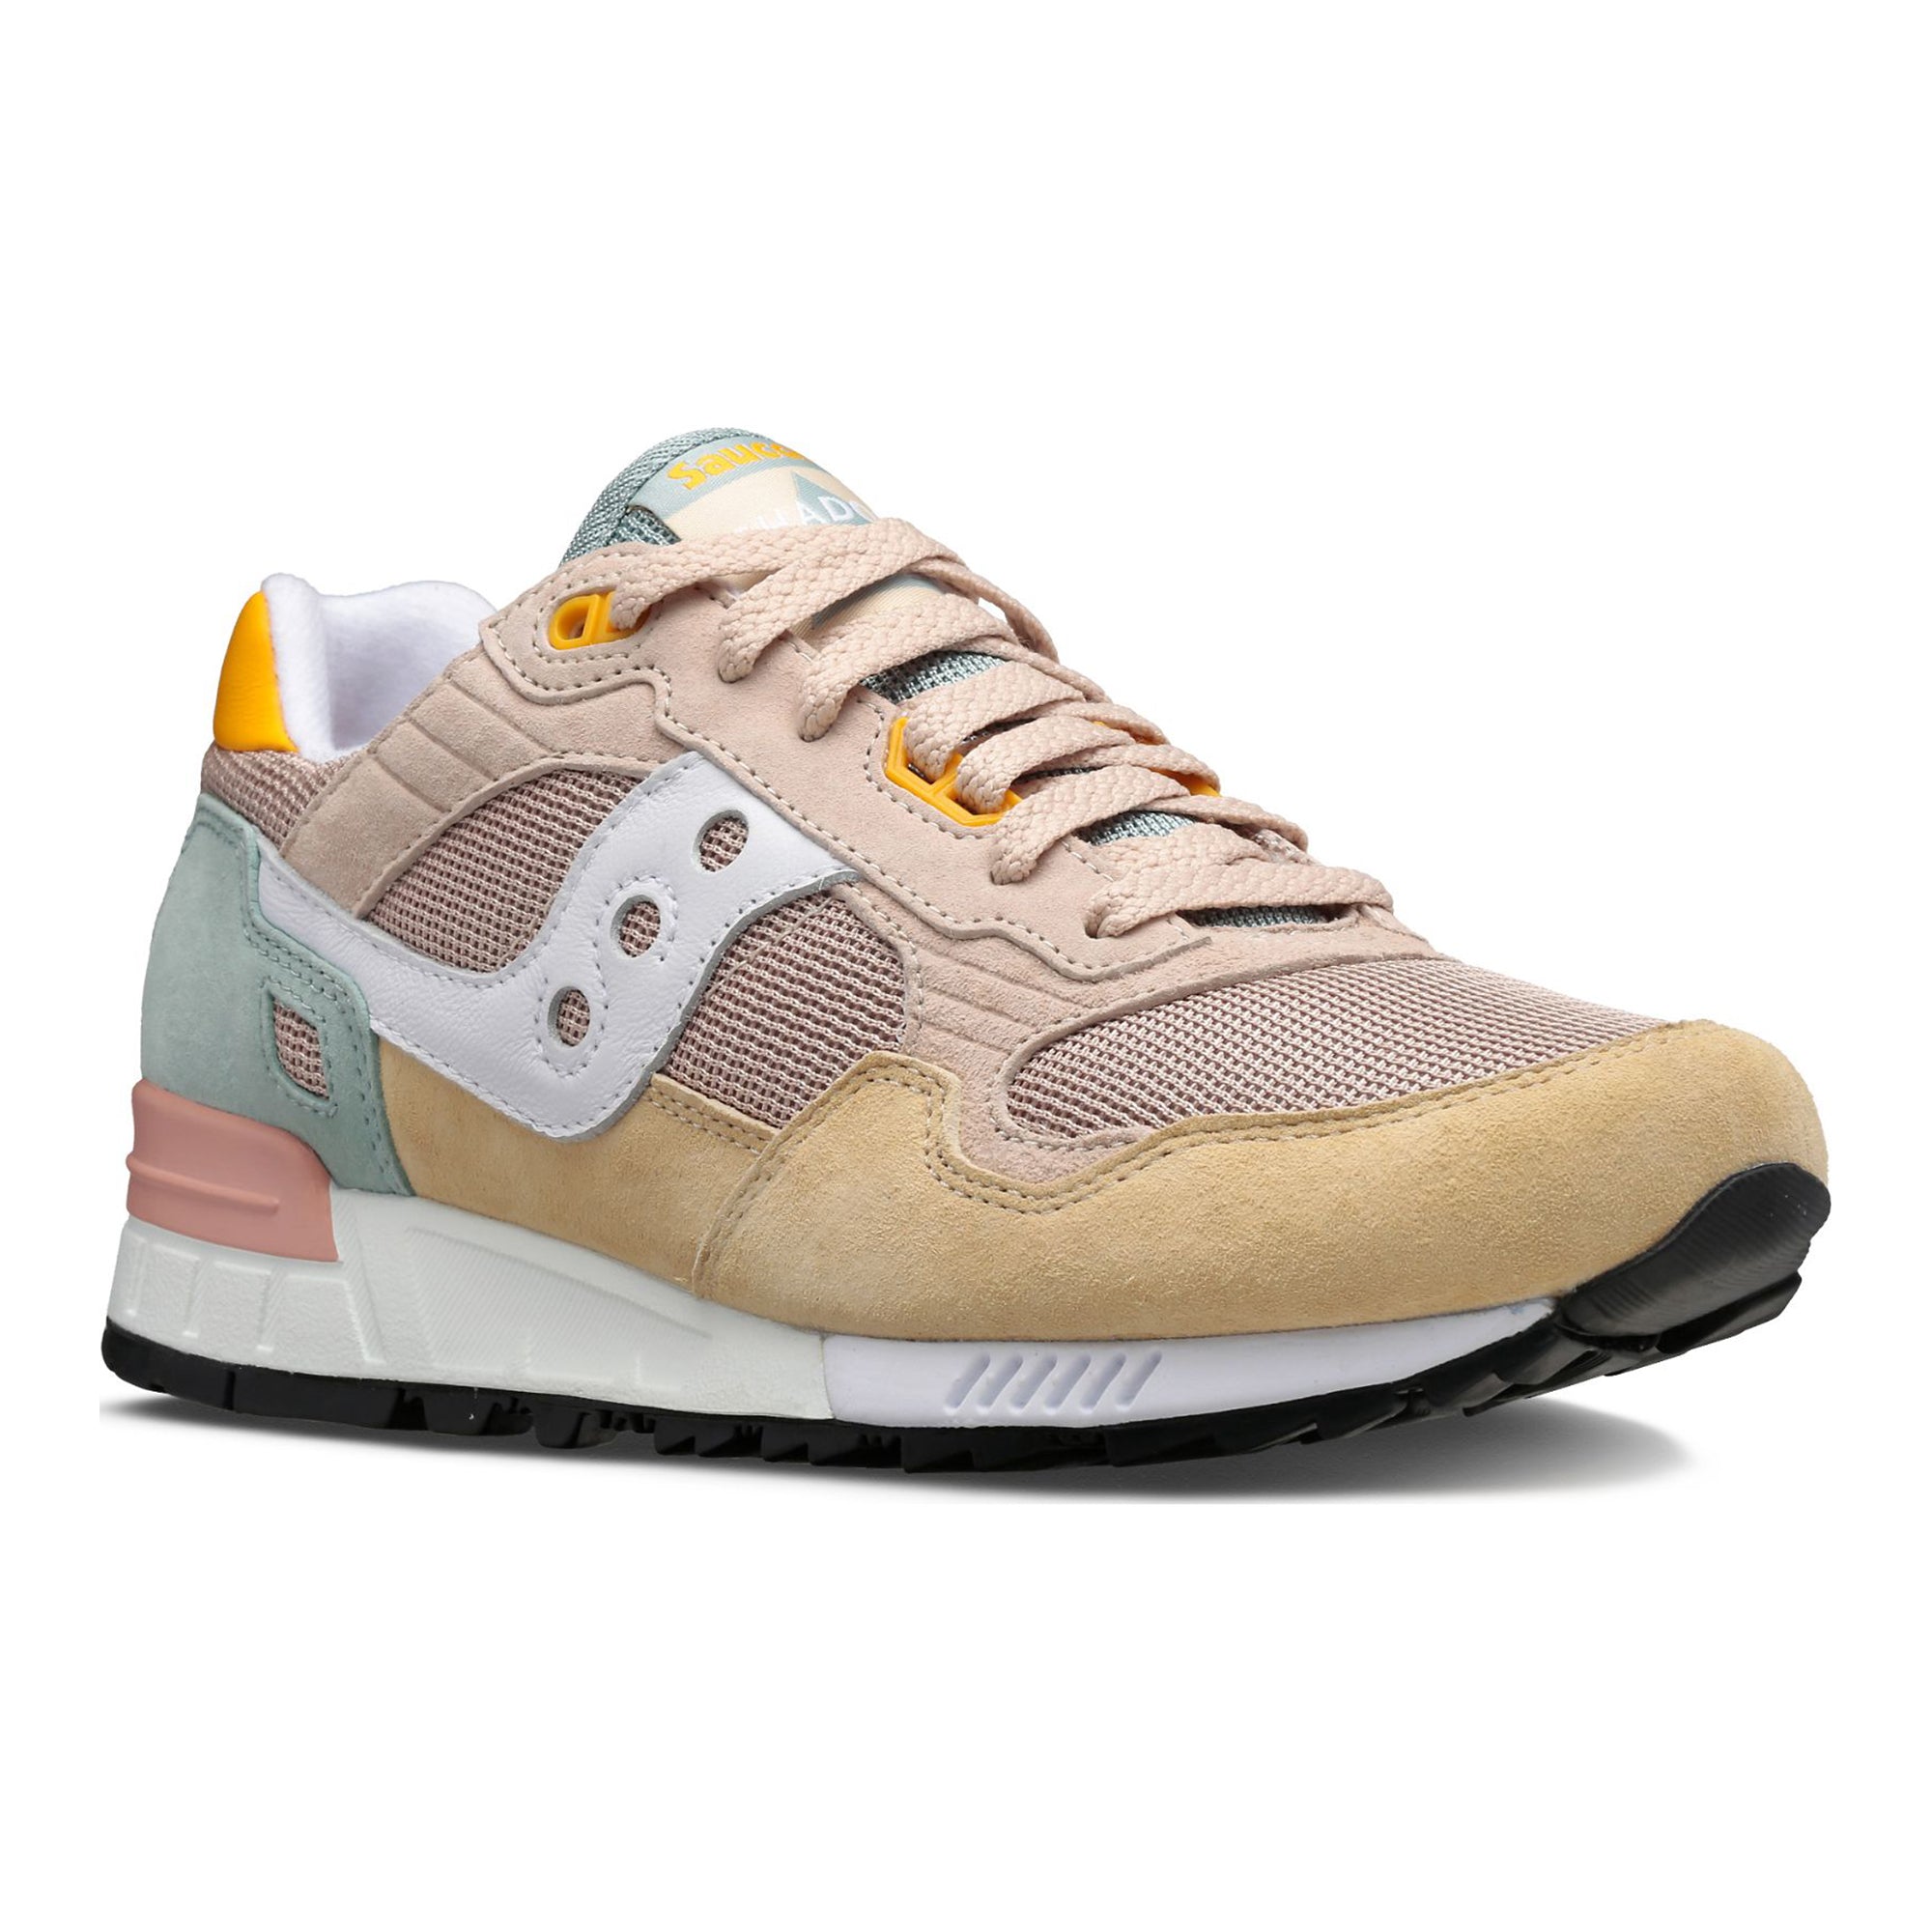 Saucony Shadow 5000 Pastel Trainers - White/Beige